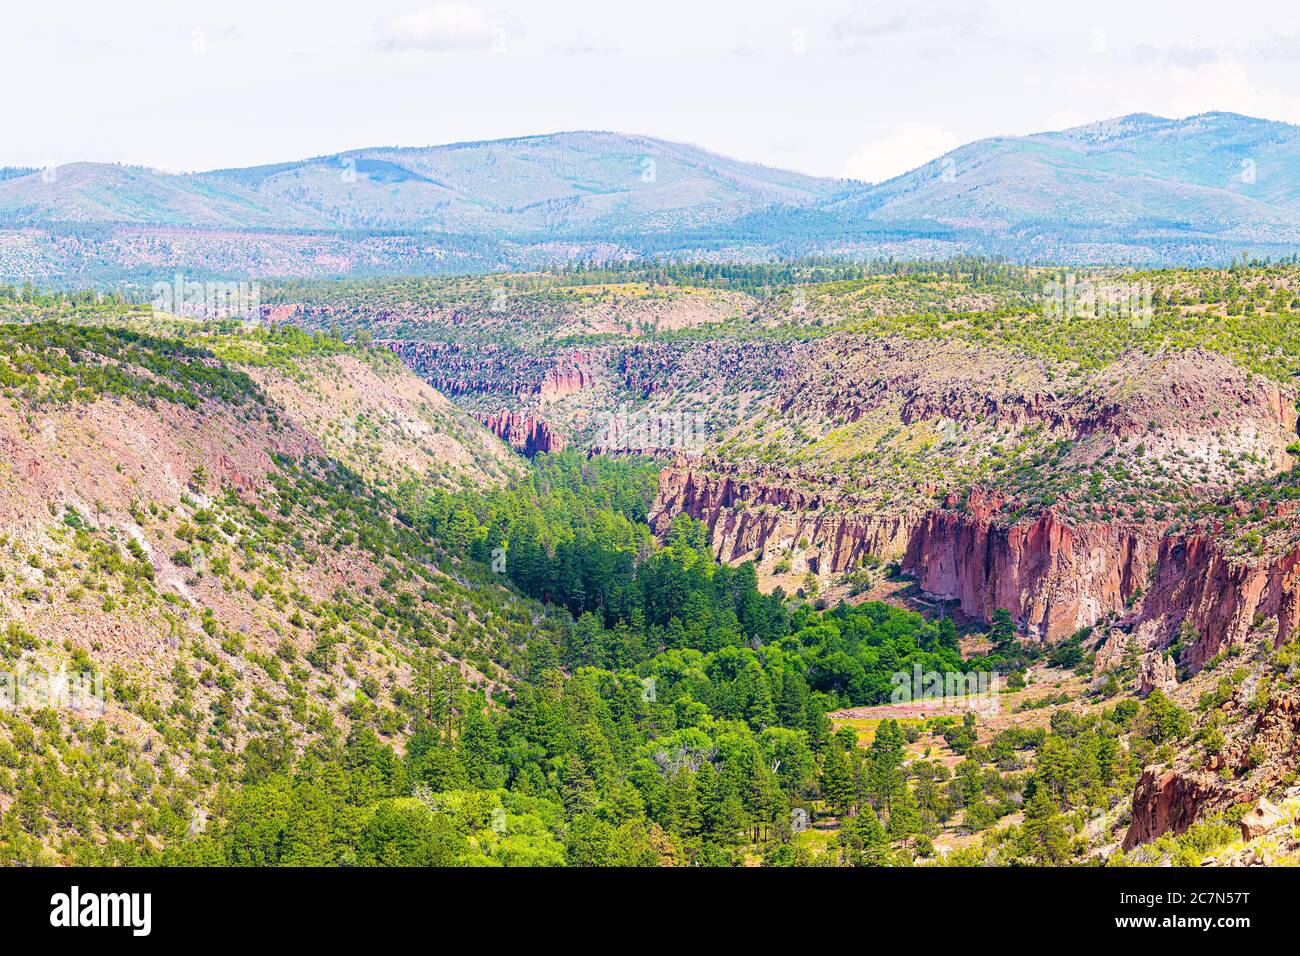 View of canyon overlook vista in Bandelier National Monument in New Mexico in Los Alamos during summer with Jemez mountains and rock formations Stock Photo